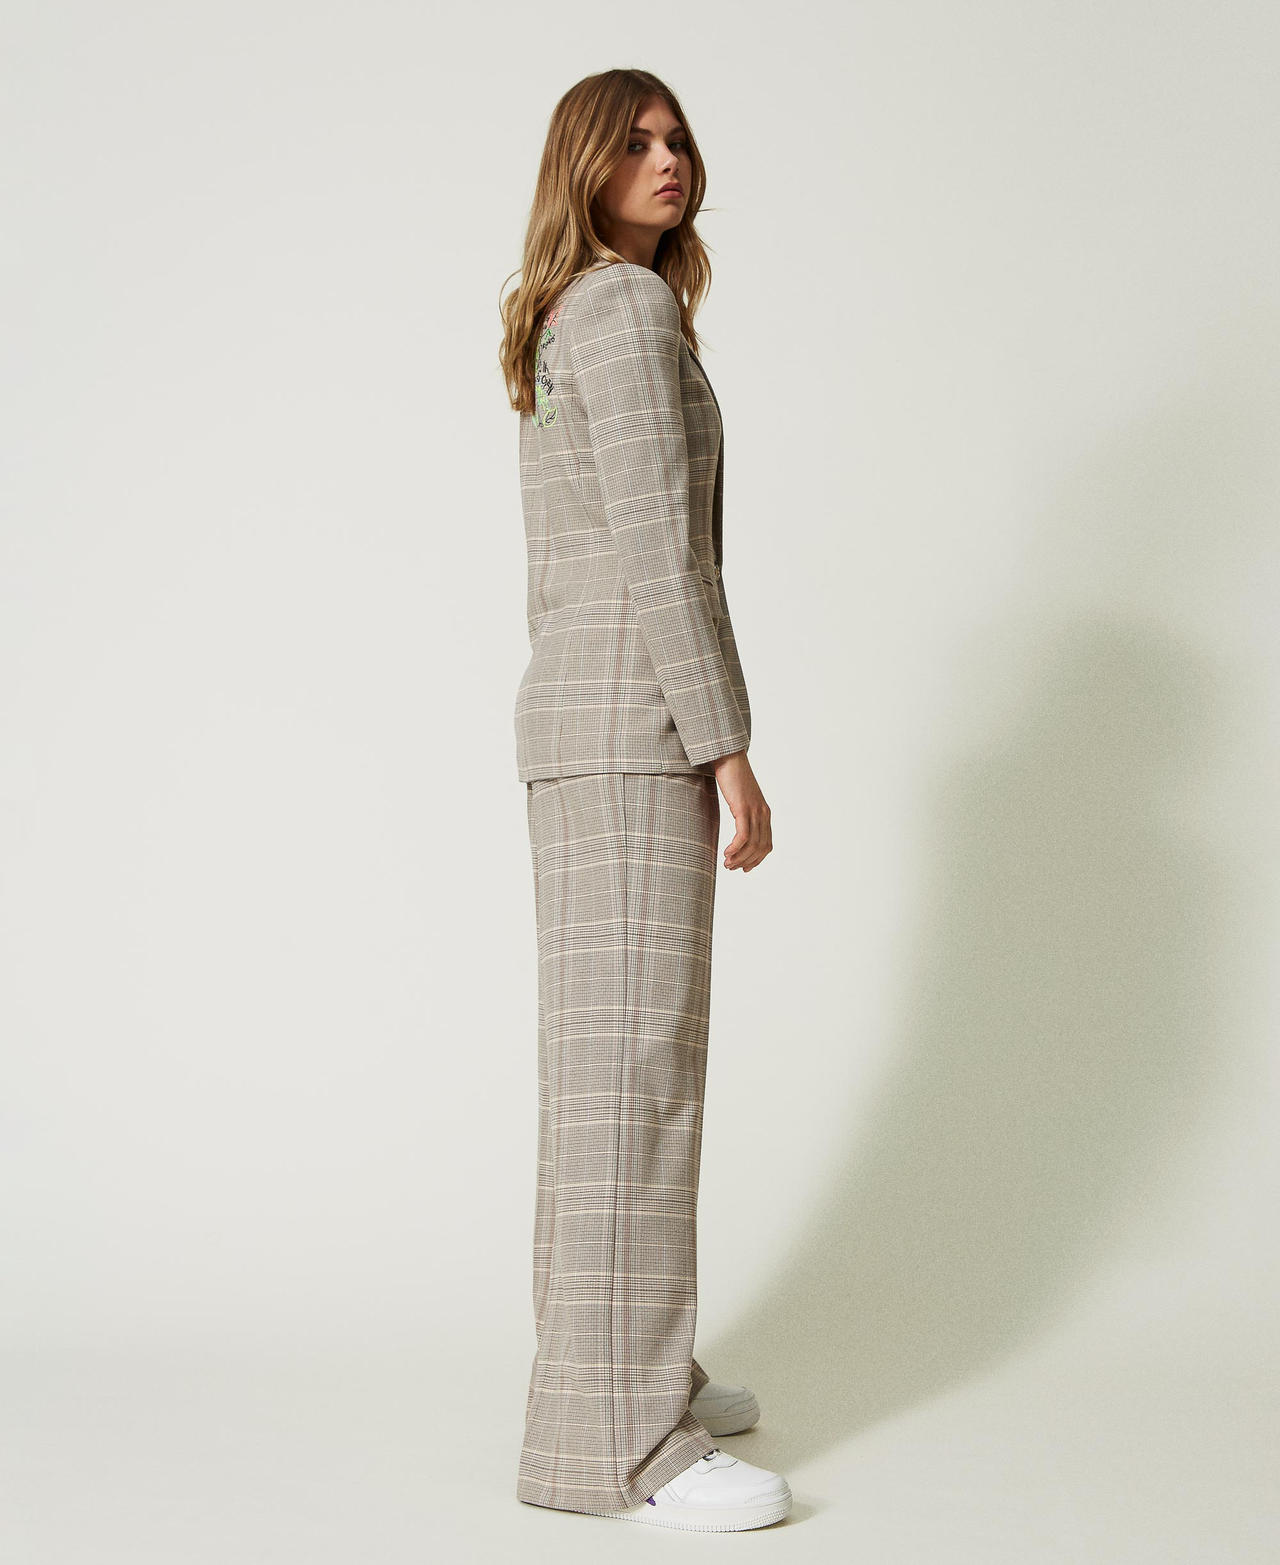 Glen plaid MYFO trousers with embroideries Myfo Check Woman 232AQ2042-03